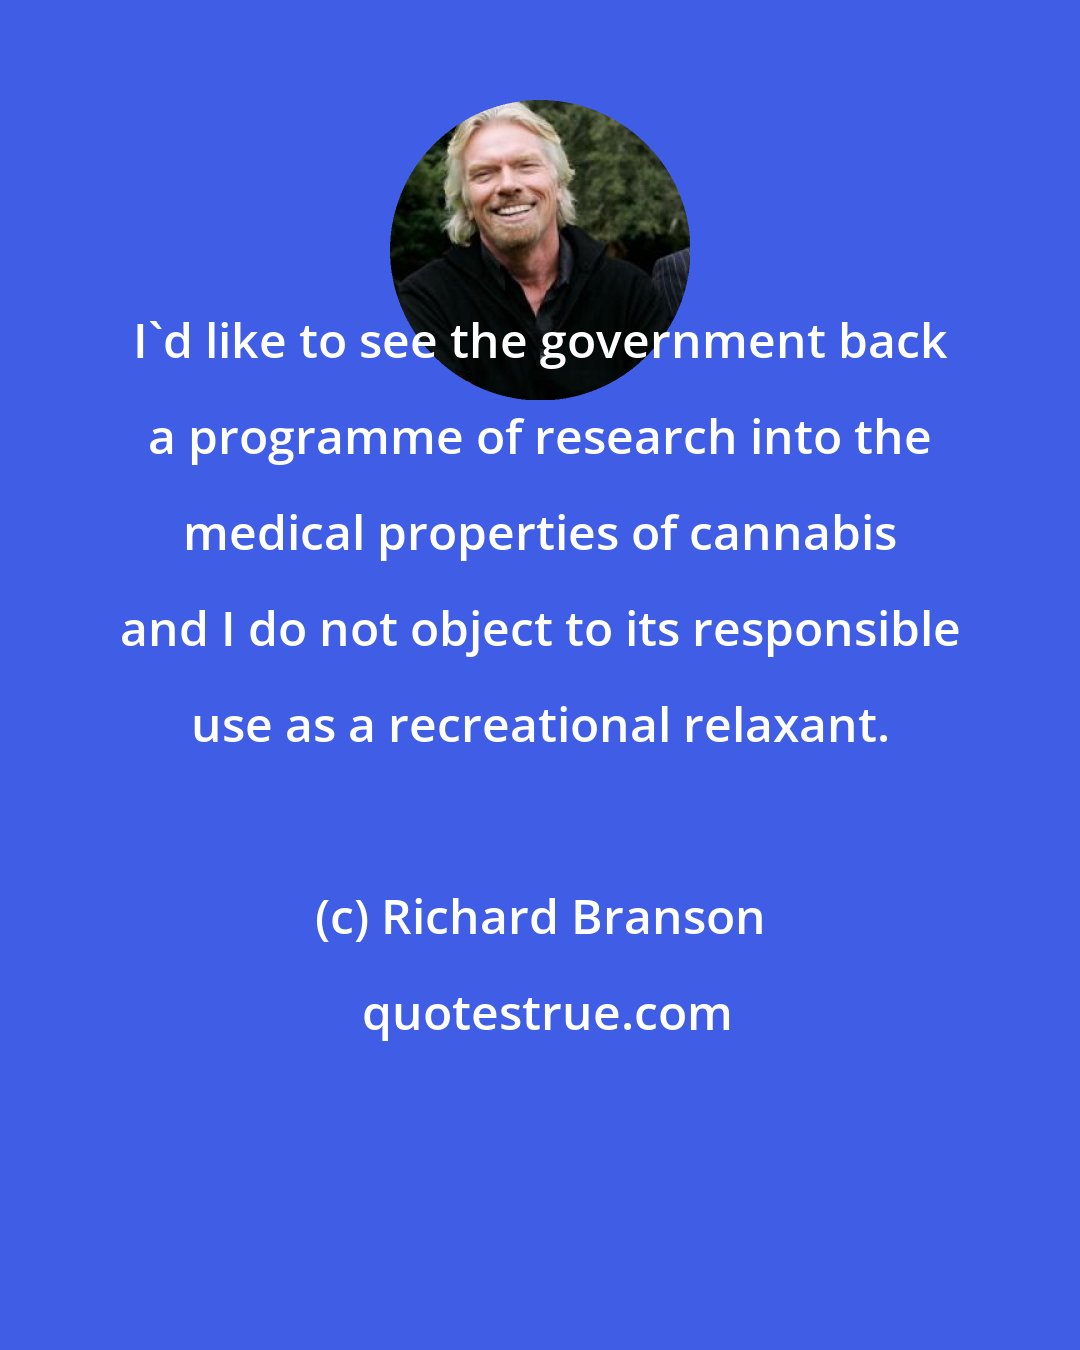 Richard Branson: I'd like to see the government back a programme of research into the medical properties of cannabis and I do not object to its responsible use as a recreational relaxant.